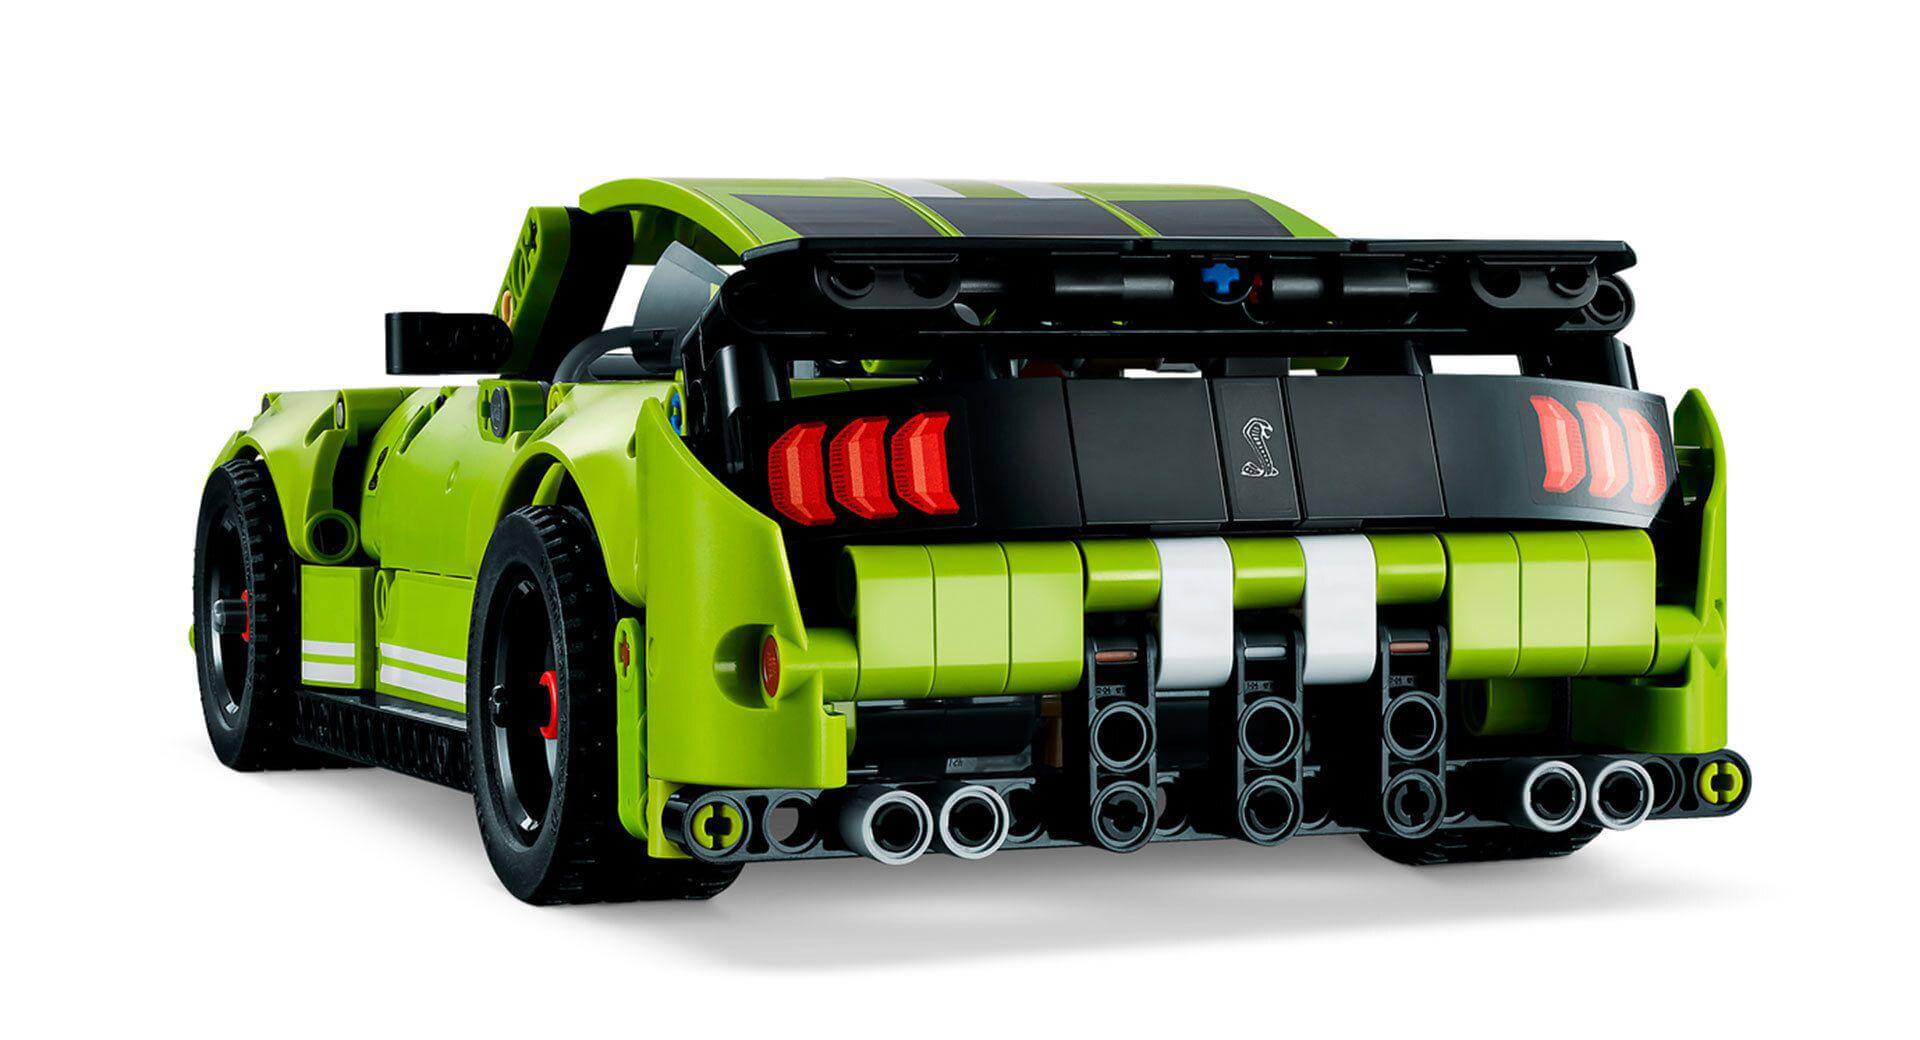 Ford Mustang Shelby GT500 Lego